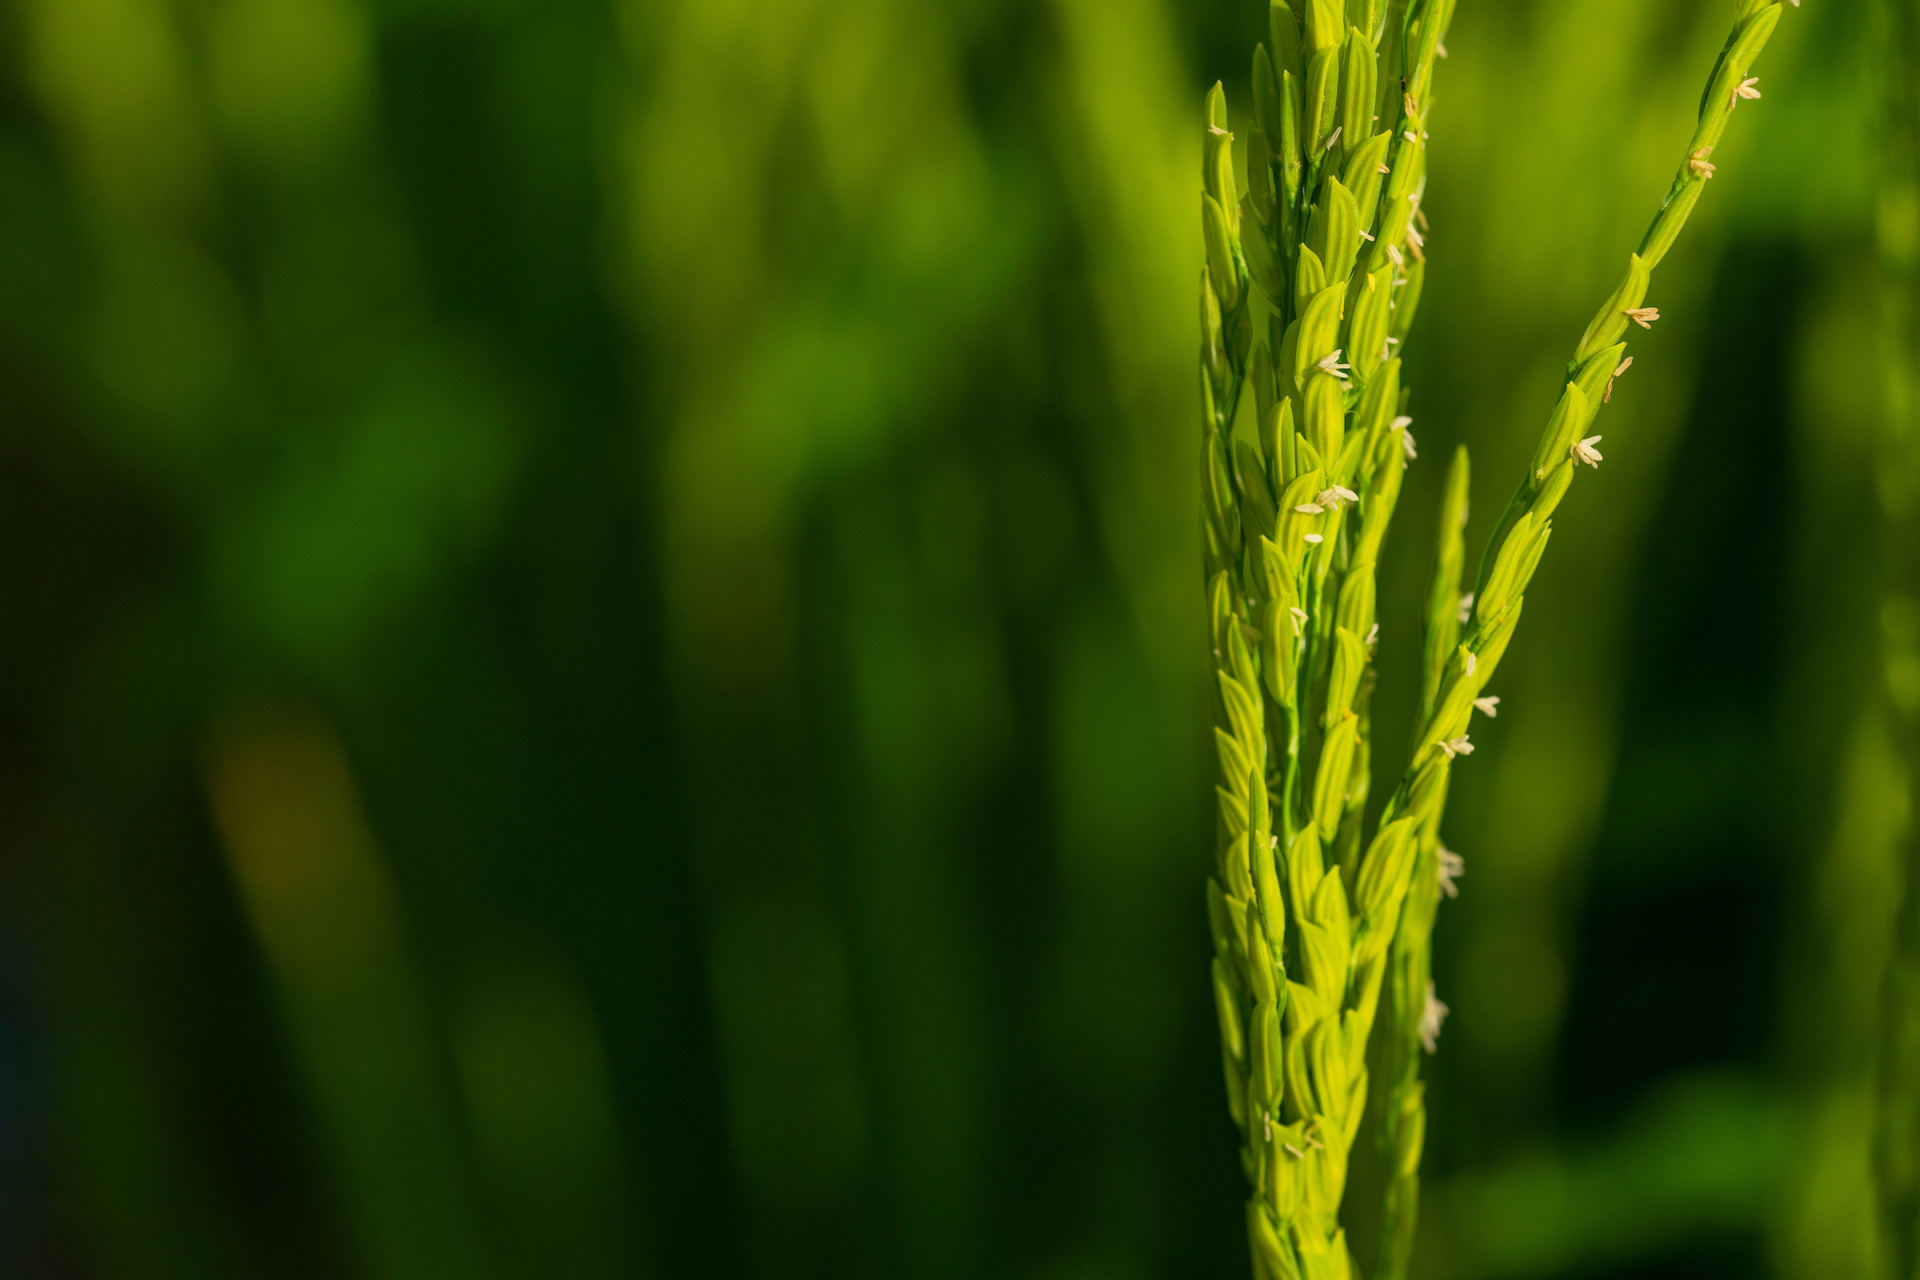 Texas rice crop conditions mixed amid volatile global market